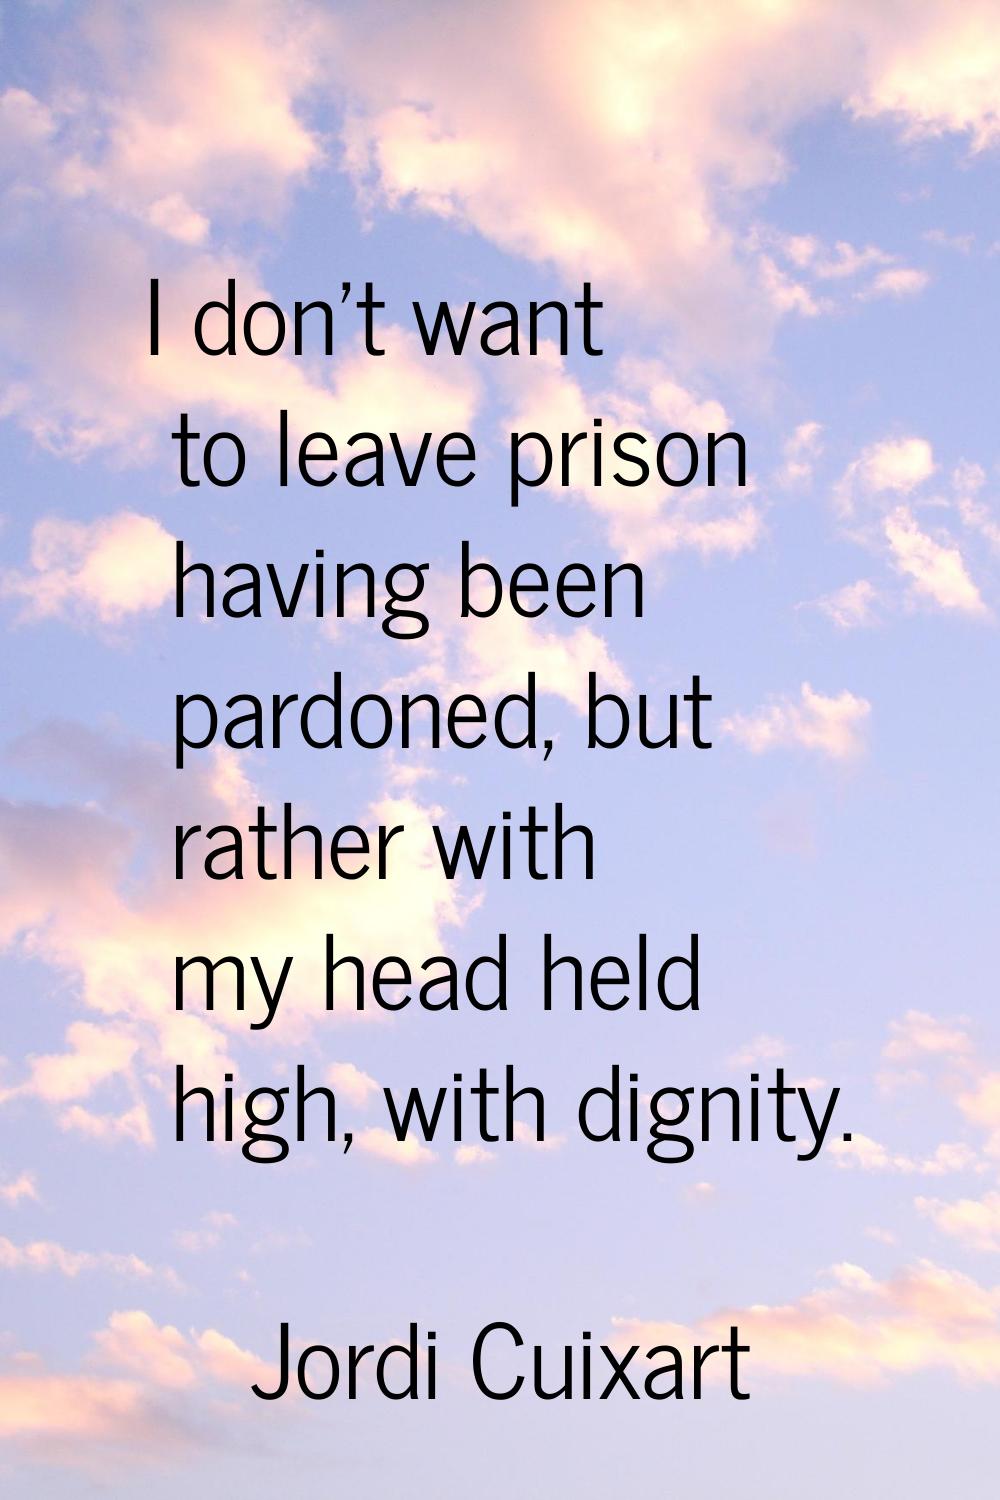 I don't want to leave prison having been pardoned, but rather with my head held high, with dignity.